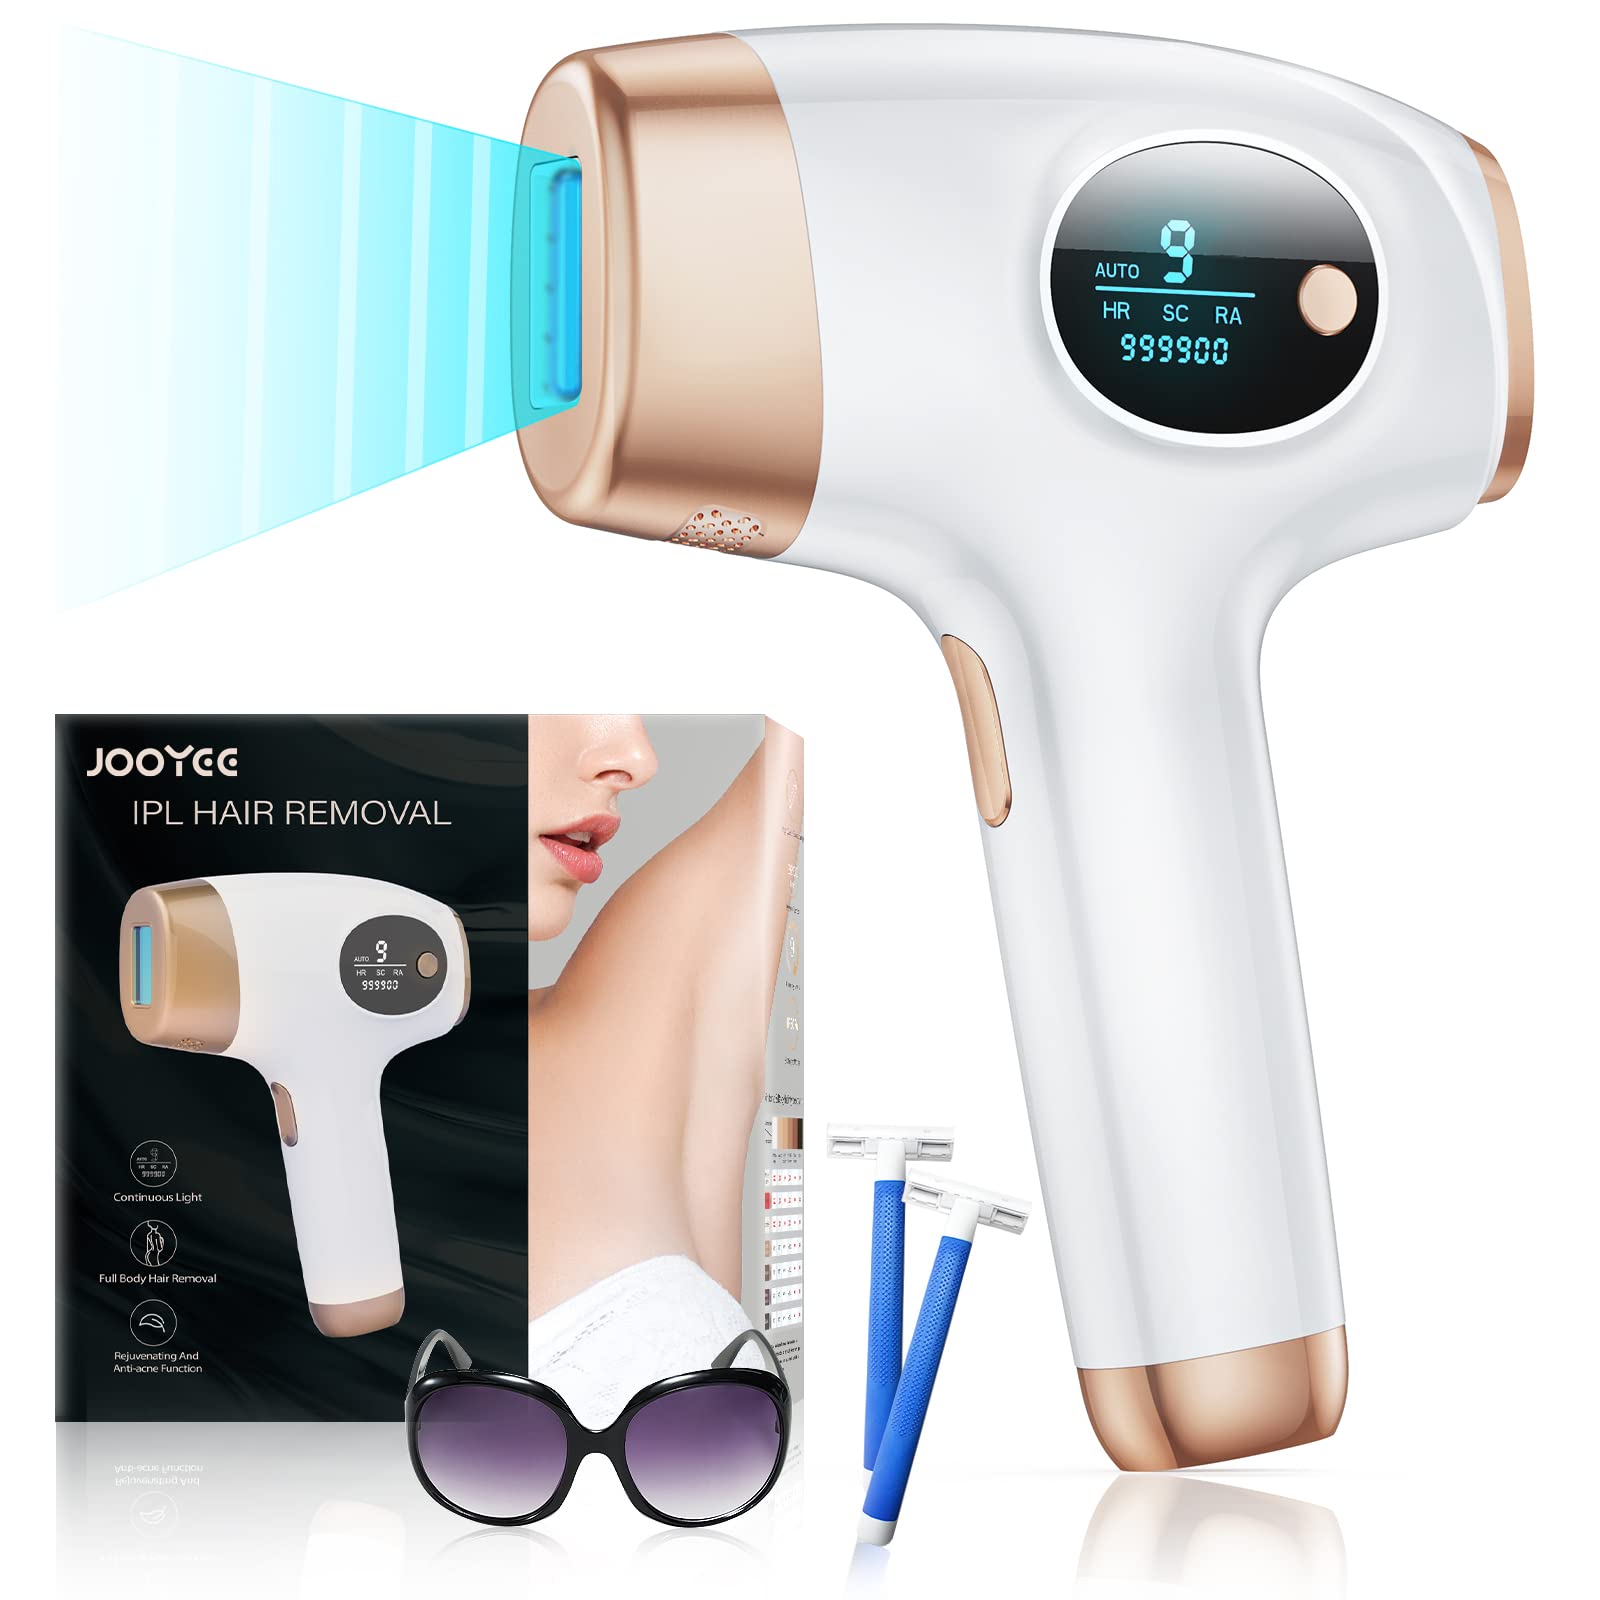 Soprano Titanium: The Worlds Most Advanced Laser Hair Removal System